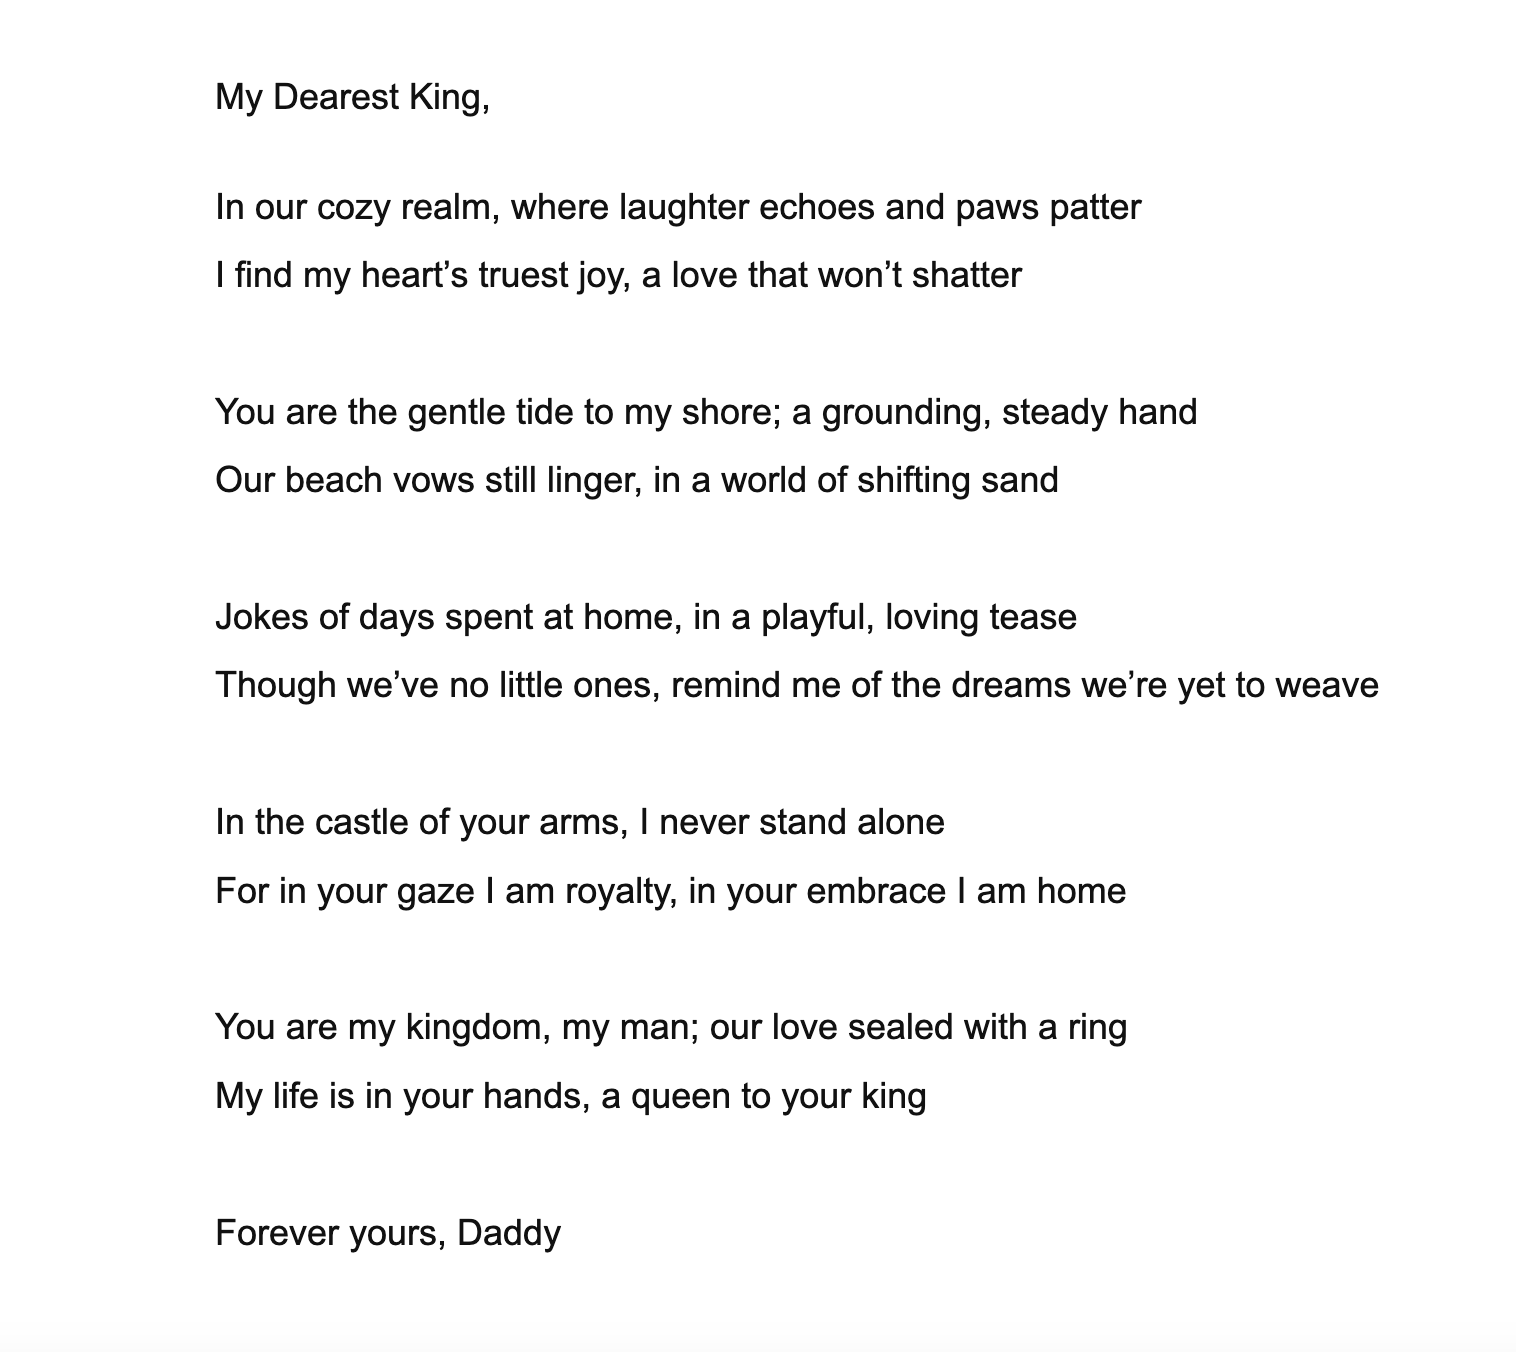 Daddy's Notes Poem for King